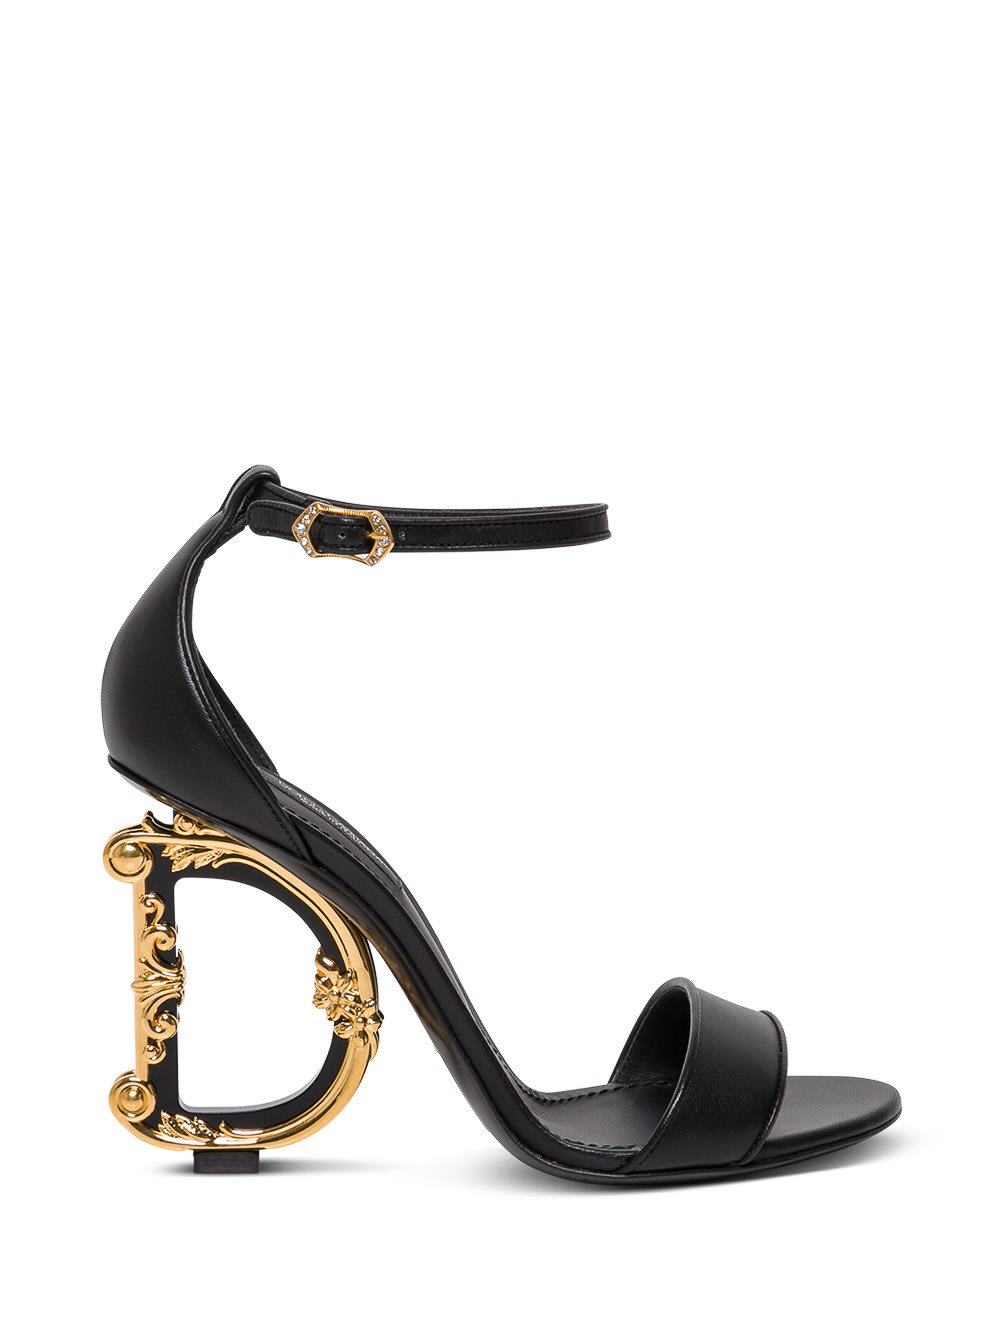 Buy Dolce & Gabbana Devotion Sandals In Black Leather online, shop Dolce & Gabbana shoes with free shipping